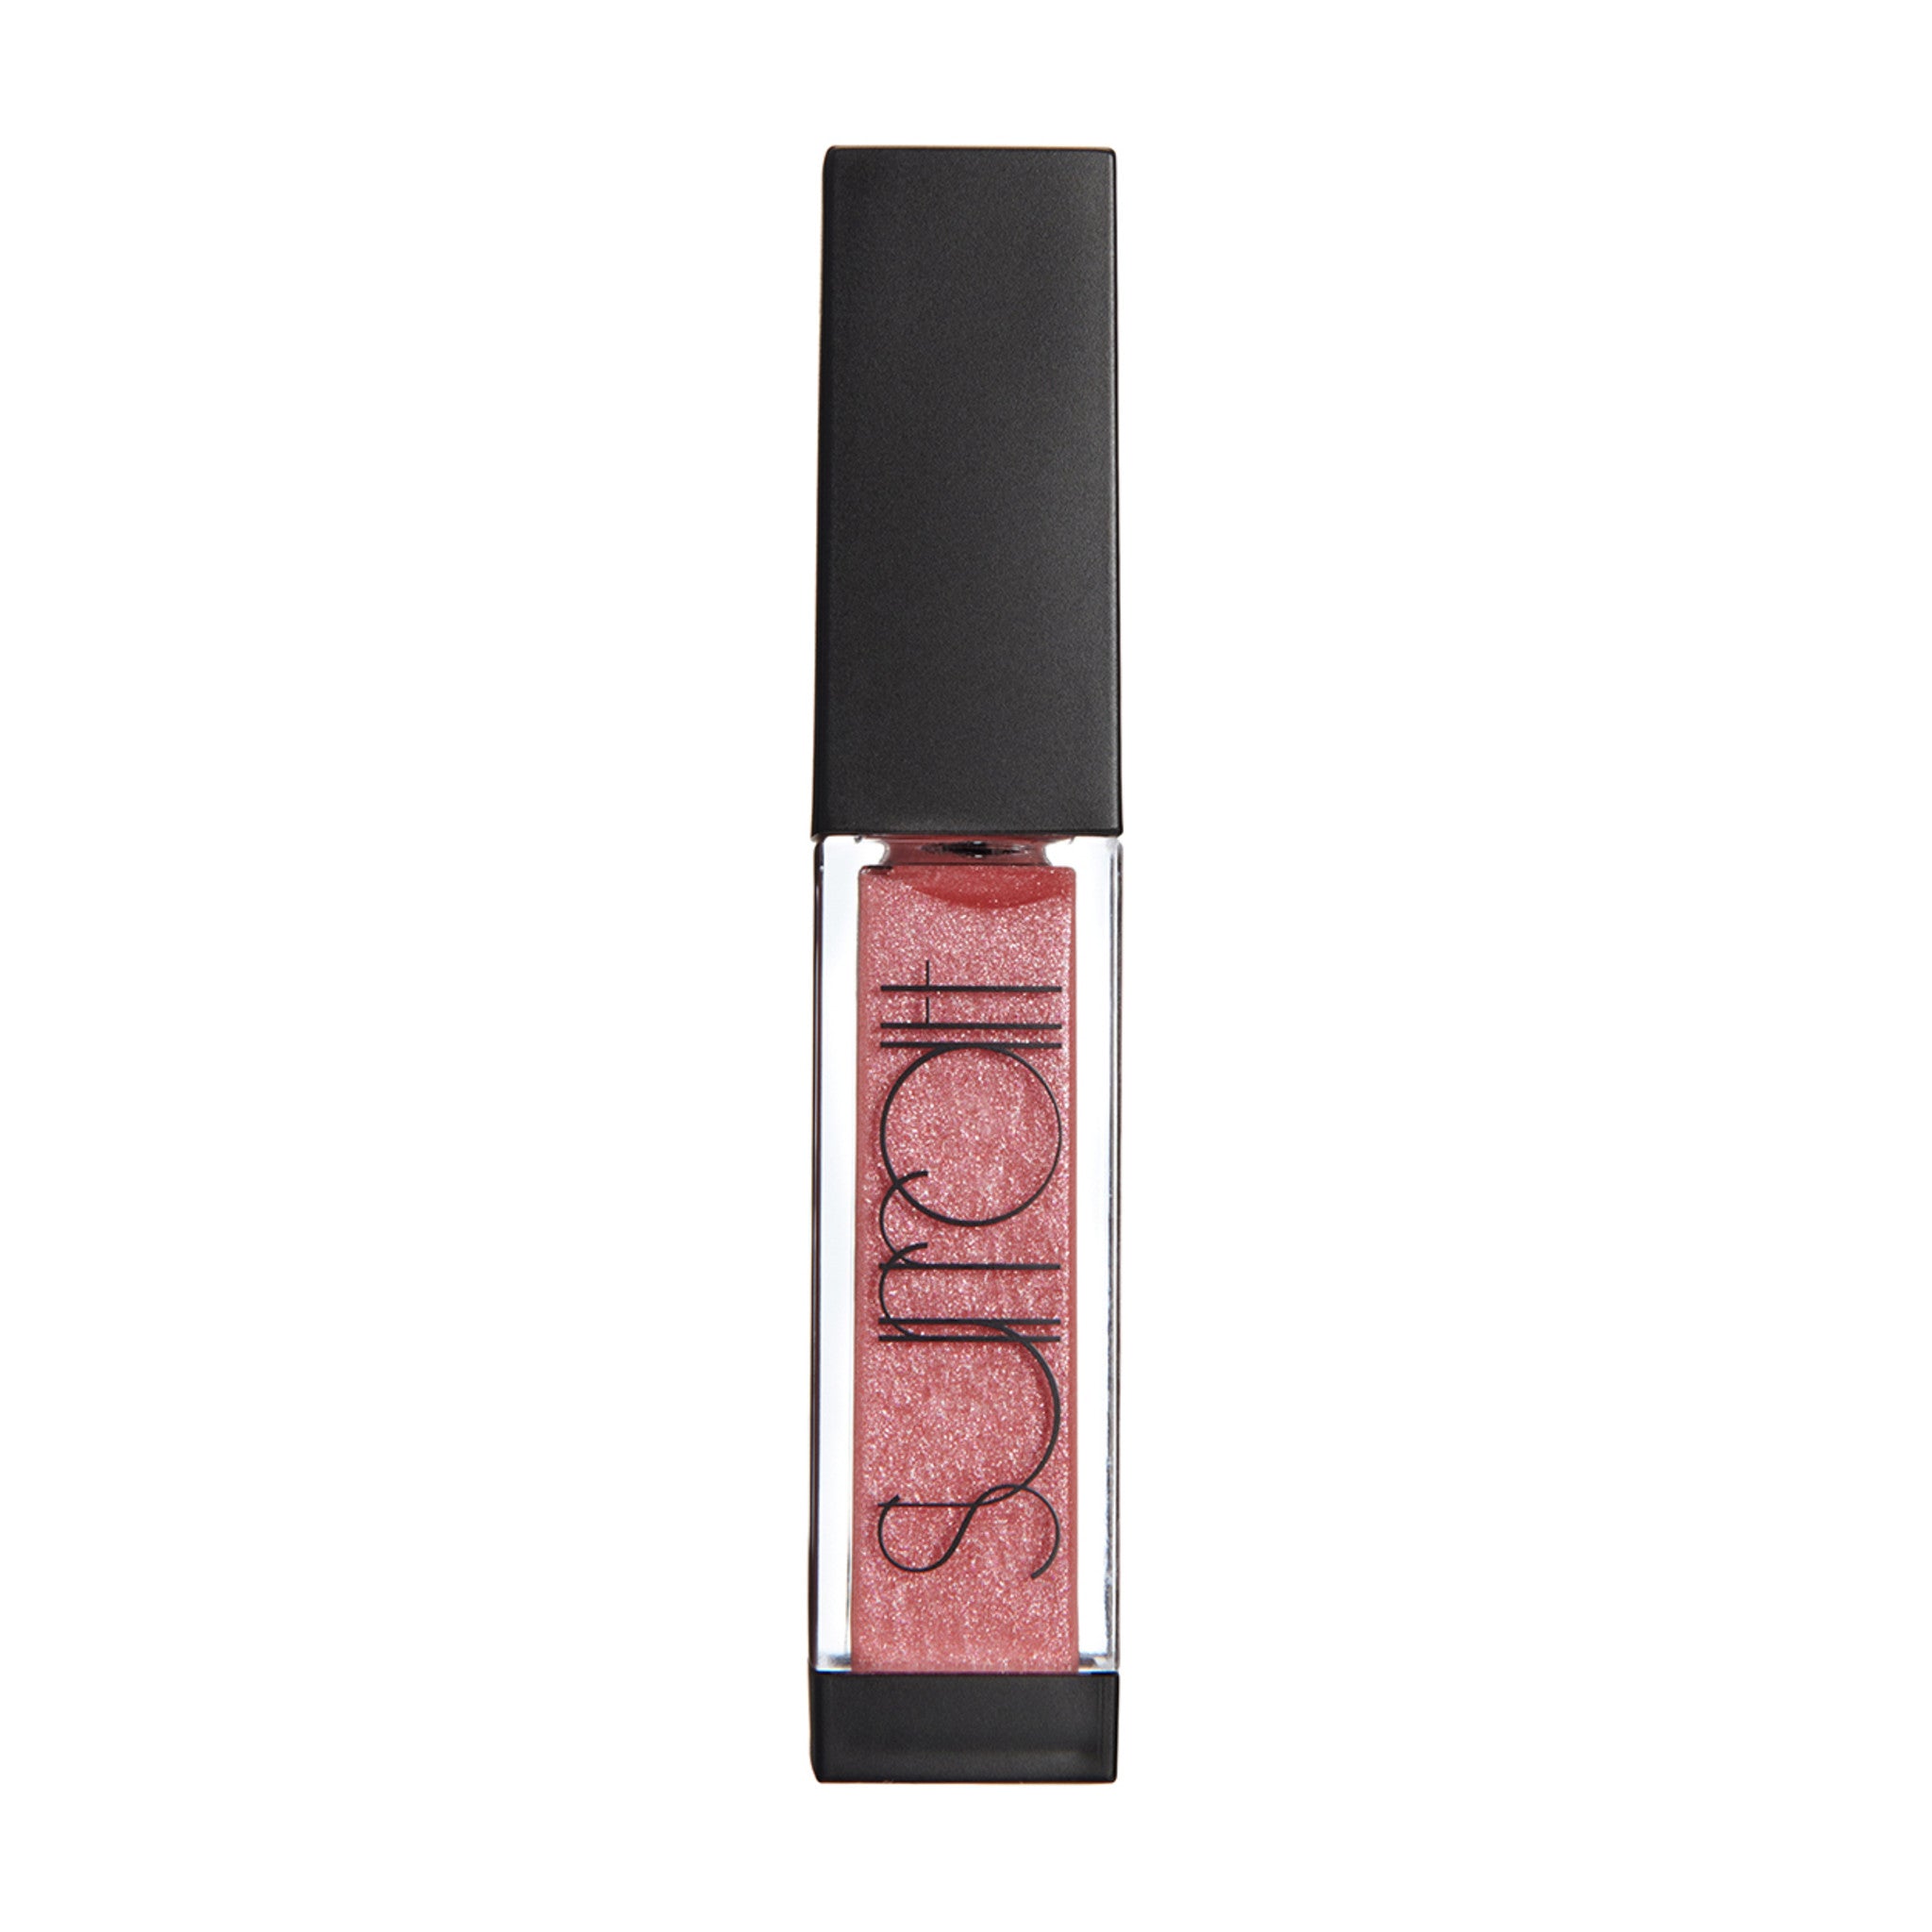 Surratt Lip Lustre Color/Shade variant: Soigné (Elegant Sparkling Rose) main image. This product is in the color pink